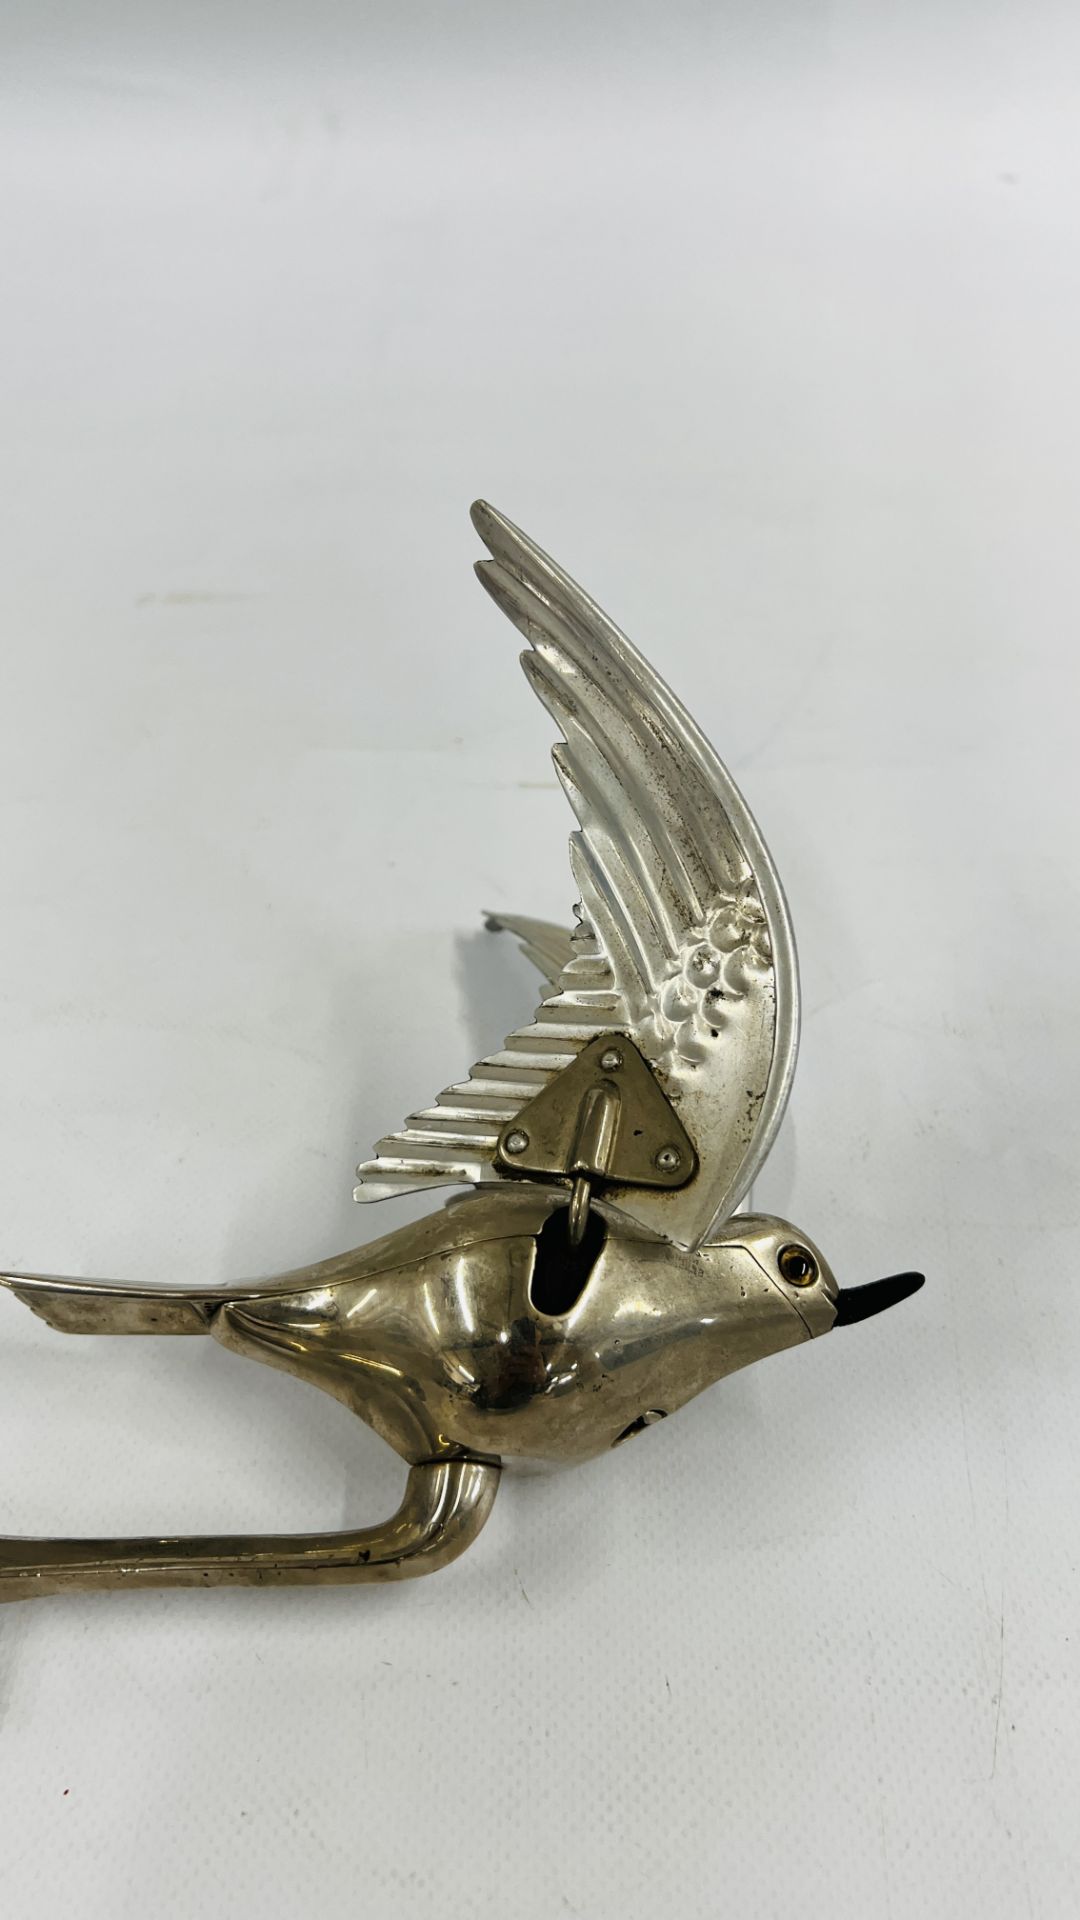 AN UNUSUAL VINTAGE FLAPPING WING BIRD CAR MASCOT (OVERALL WING SPAN 24CM). - Image 4 of 6